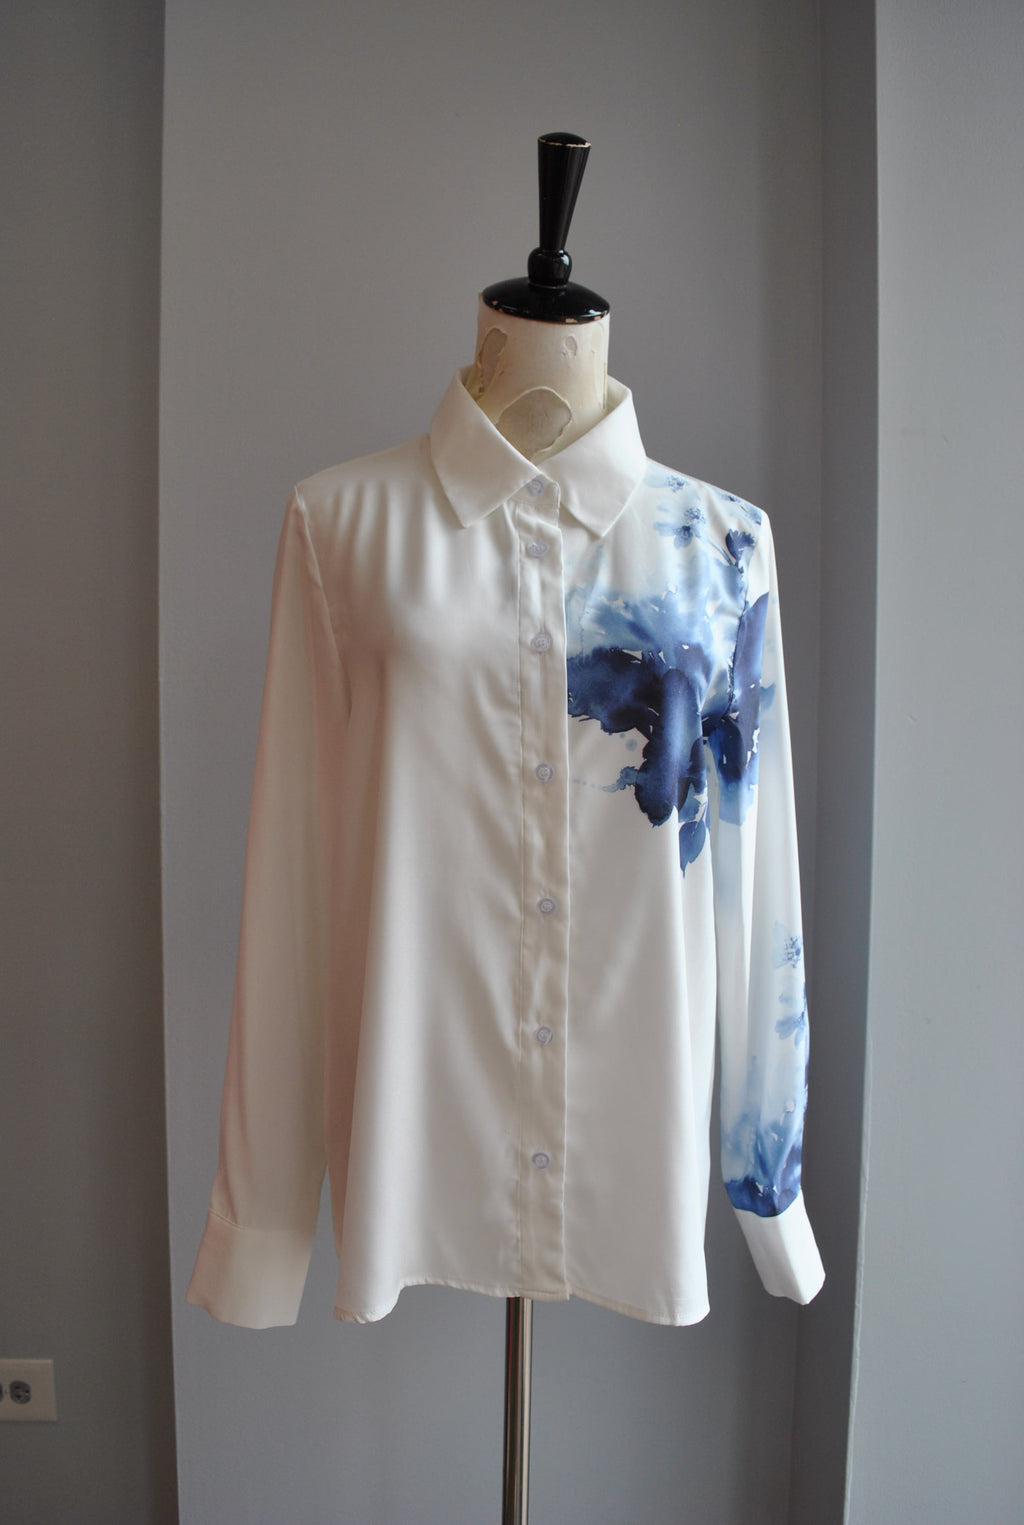 WHITE SHIRT WITH BLUE FLOWER